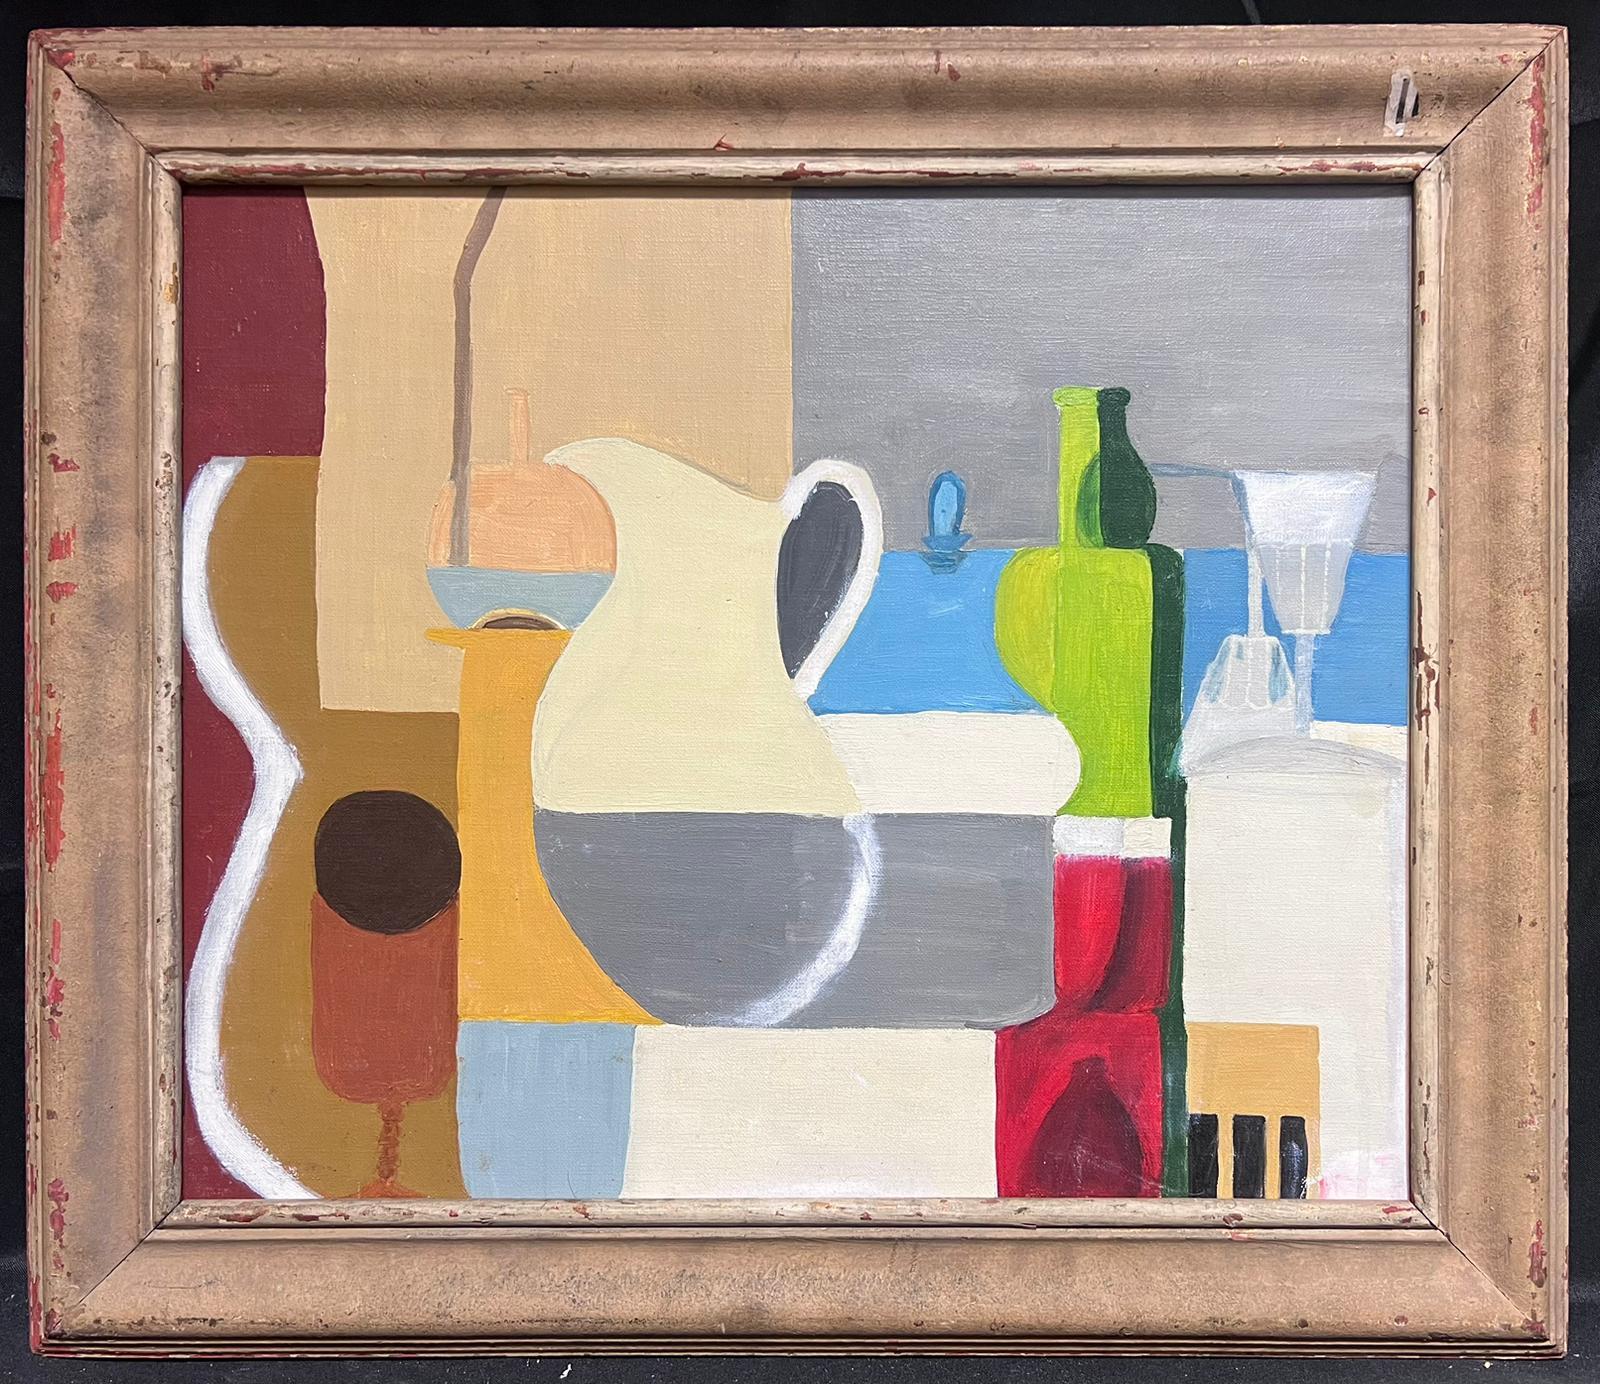 Cubist Still Life Composition
French School, mid 20th century
oil on canvas, framed
framed: 22 x 26 inches
canvas: 18 x 21.5 inches
provenance: private collection, Paris
condition: very good and sound condition